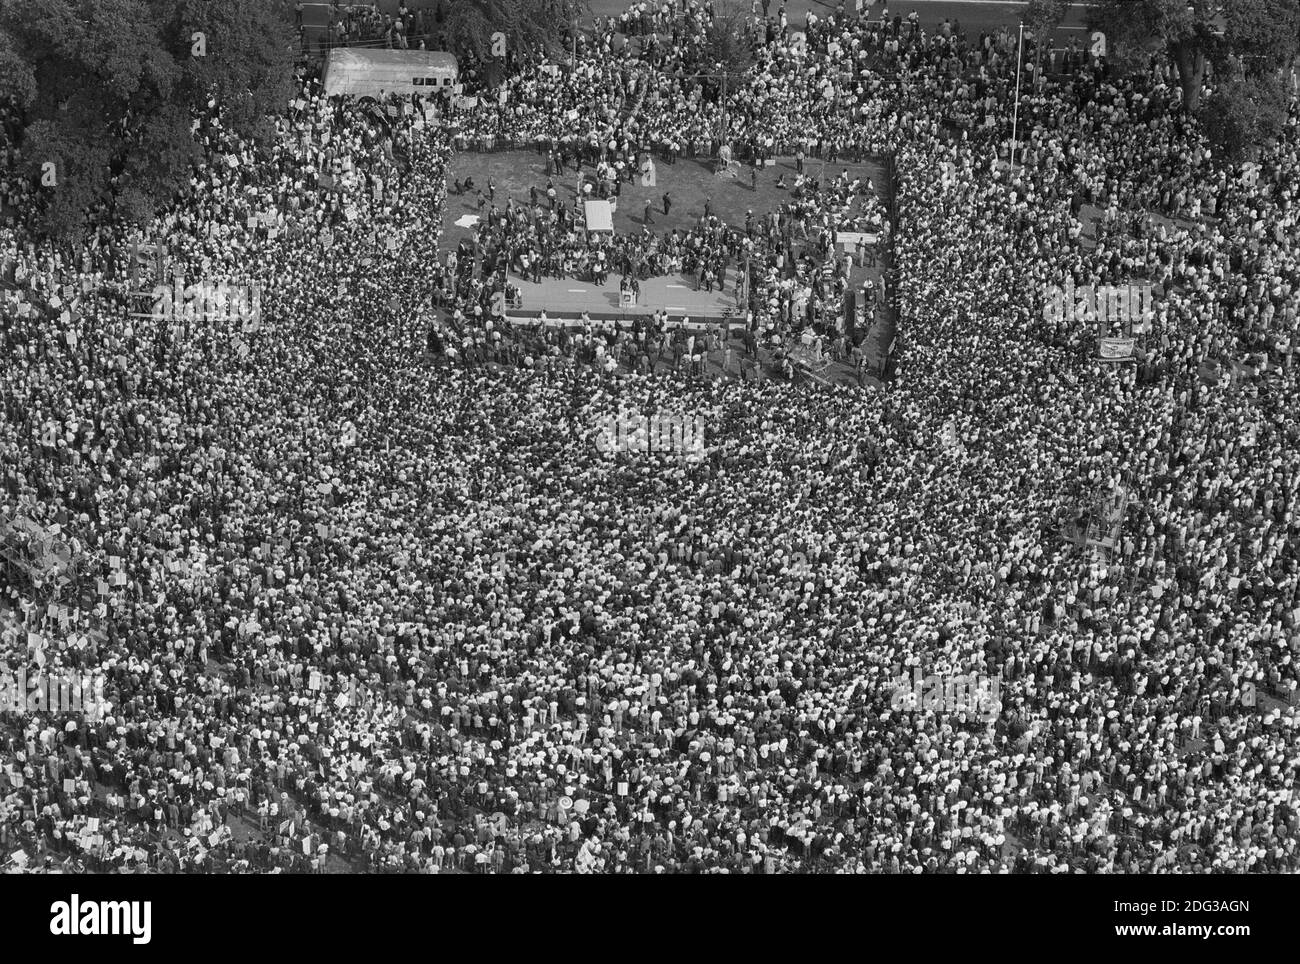 High Angle View of Crowd of Protesters at March on Washington for Jobs and Freedom, Washington, D.C., USA, photo di Marion S. Trikosko, 28 agosto 1963 Foto Stock